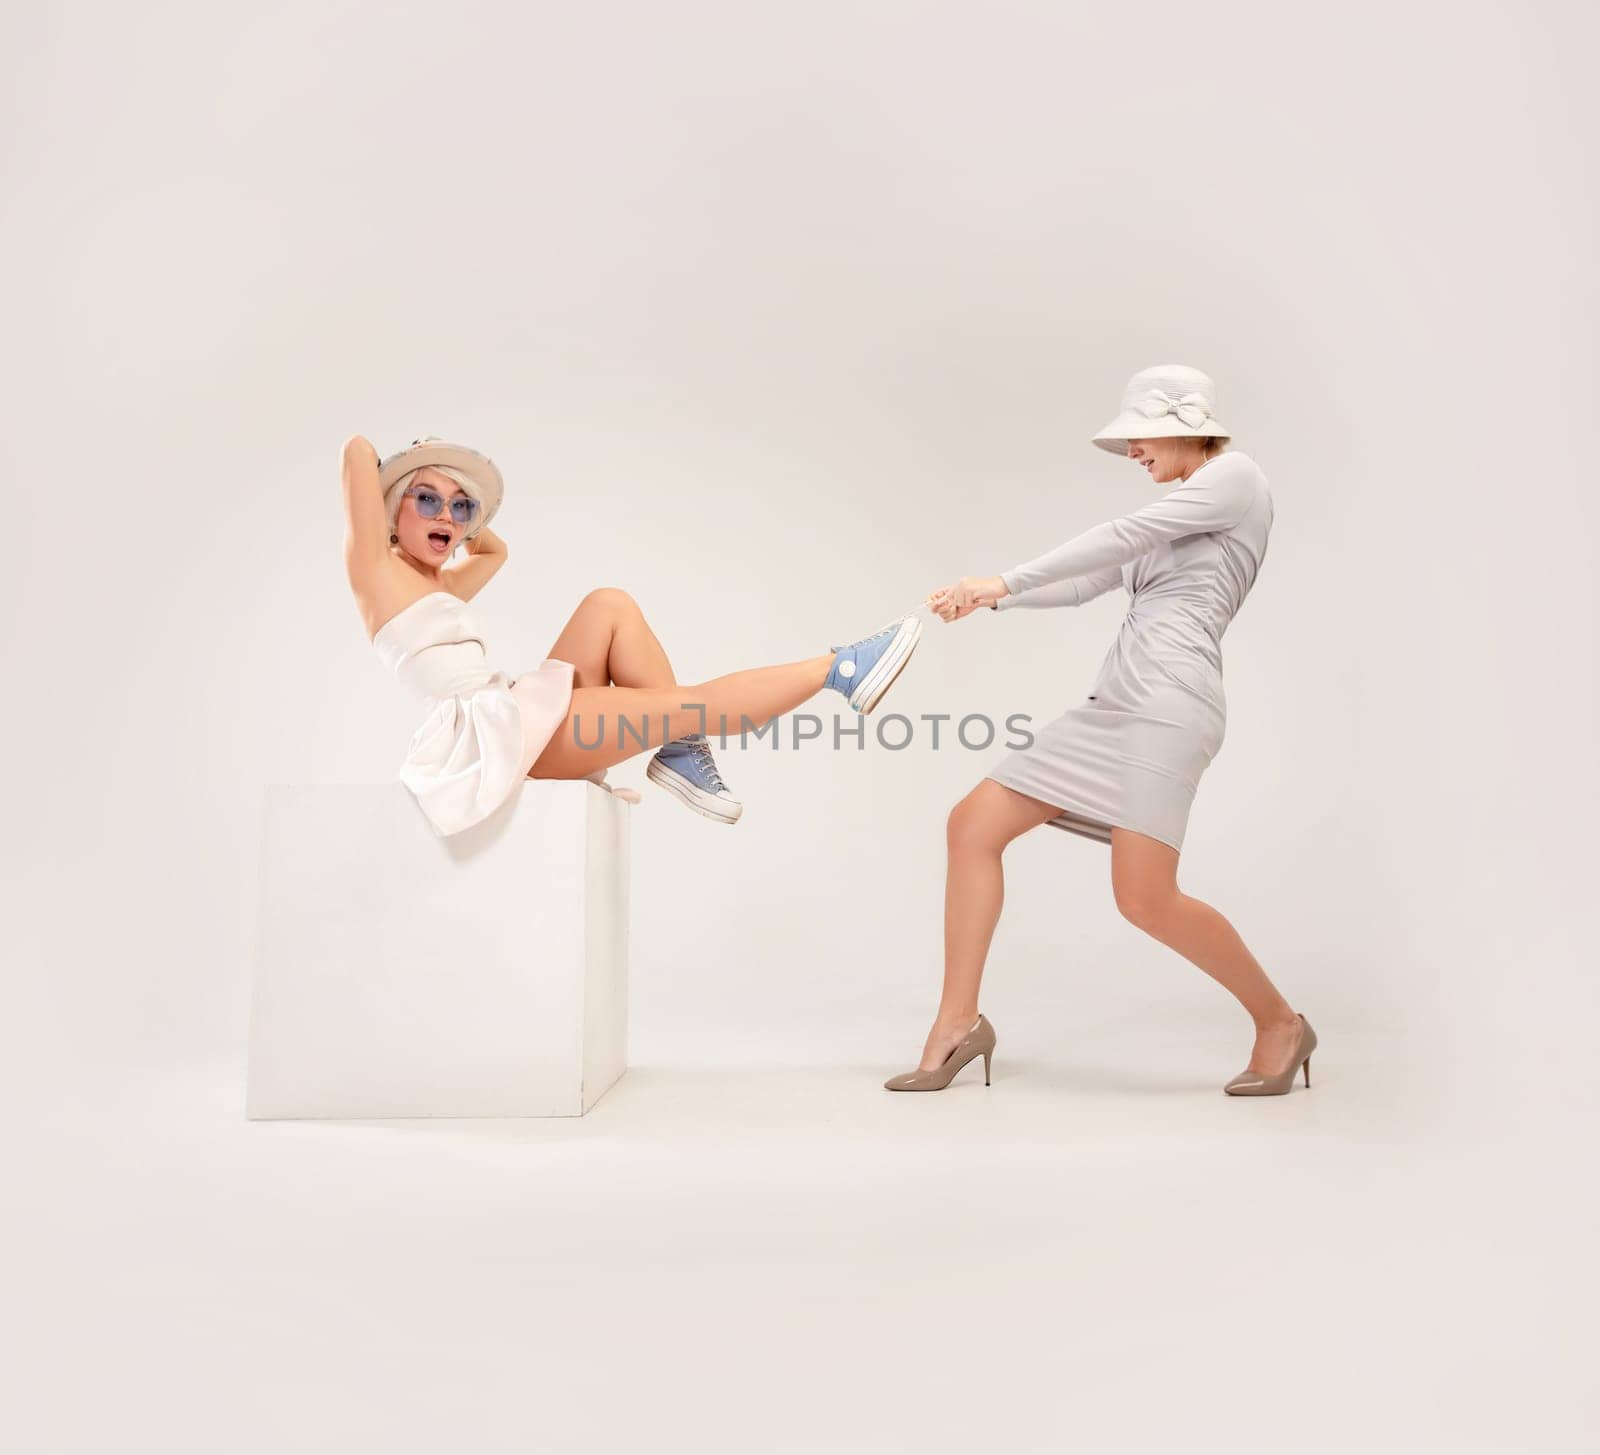 a studio photo of two girls in different styles of clothing, playing out a conflict or quarreling with each other on a white background, one pulling the other's foot while taking away shoes